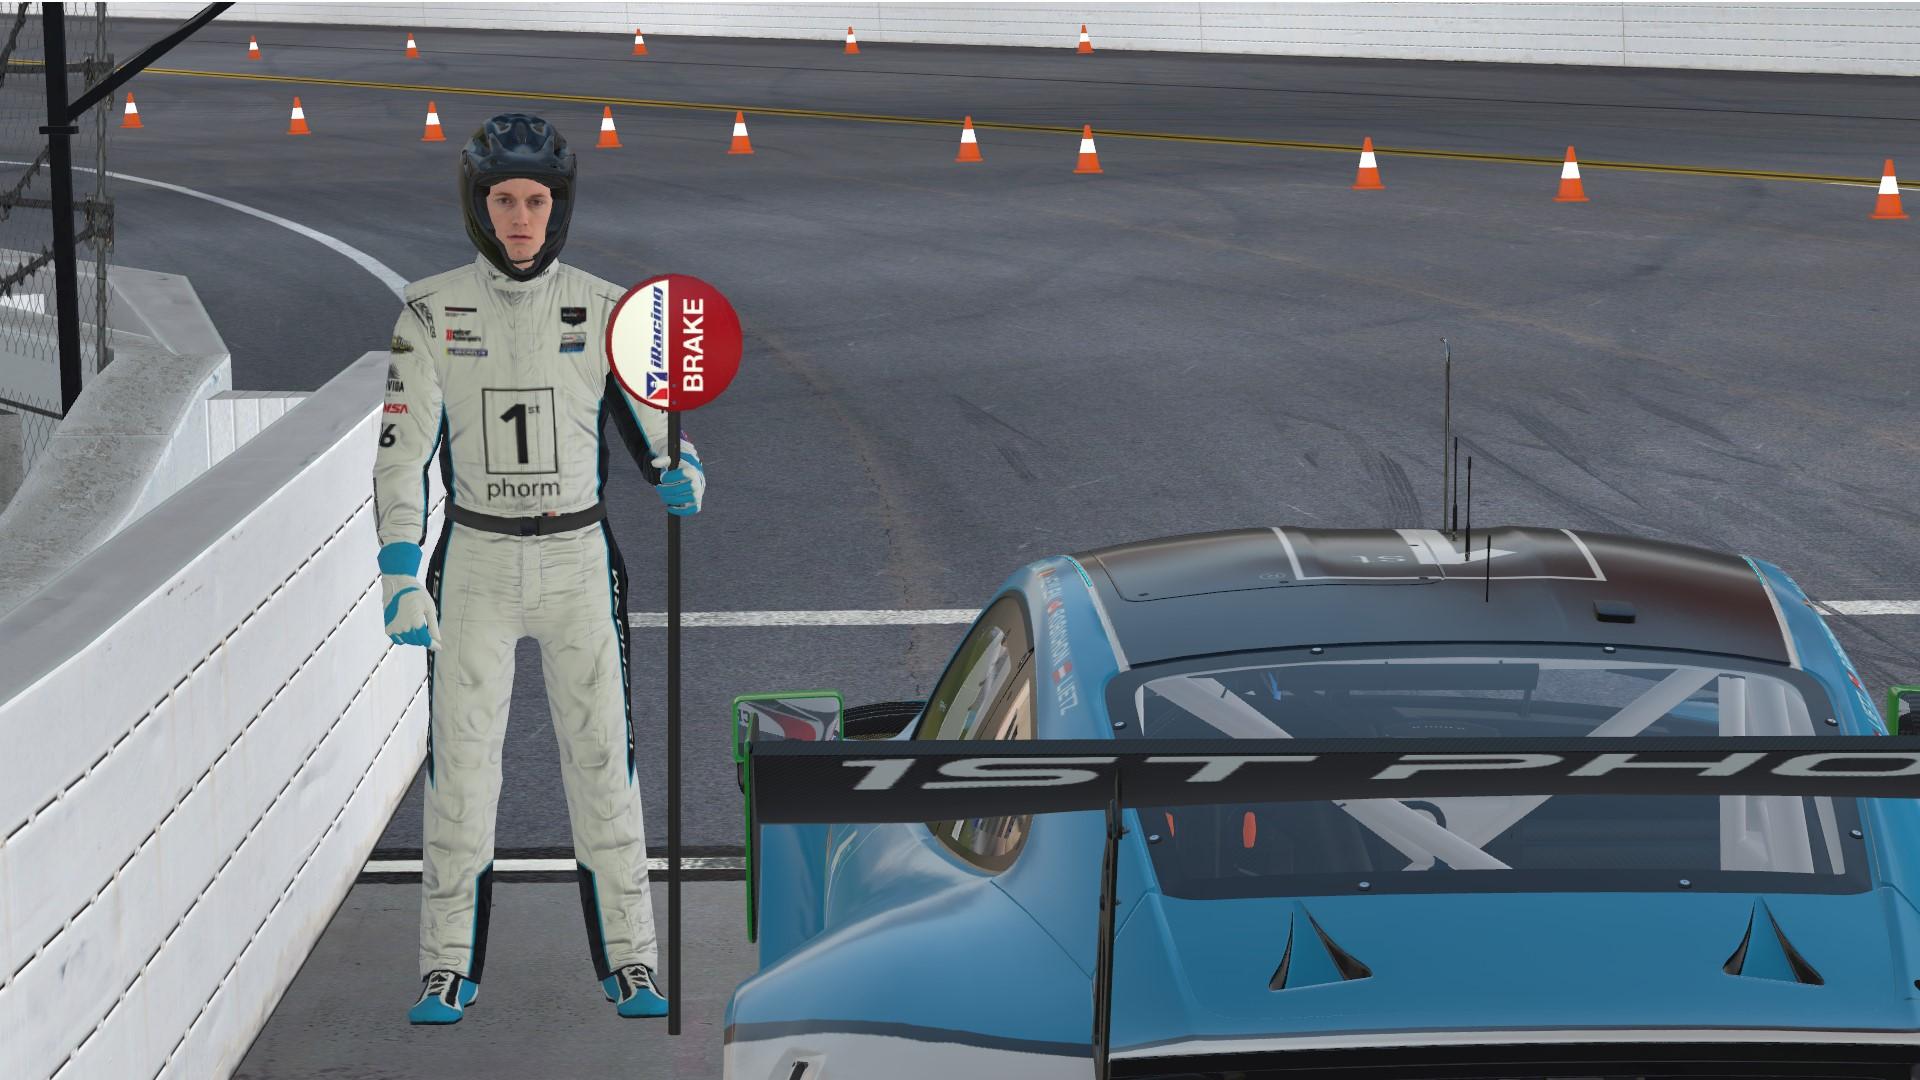 Preview of 2022 1st Phorm | Wright Motorsports | Una Vida | Mountain Motorsports IMSA Suit by Phil Schroeder